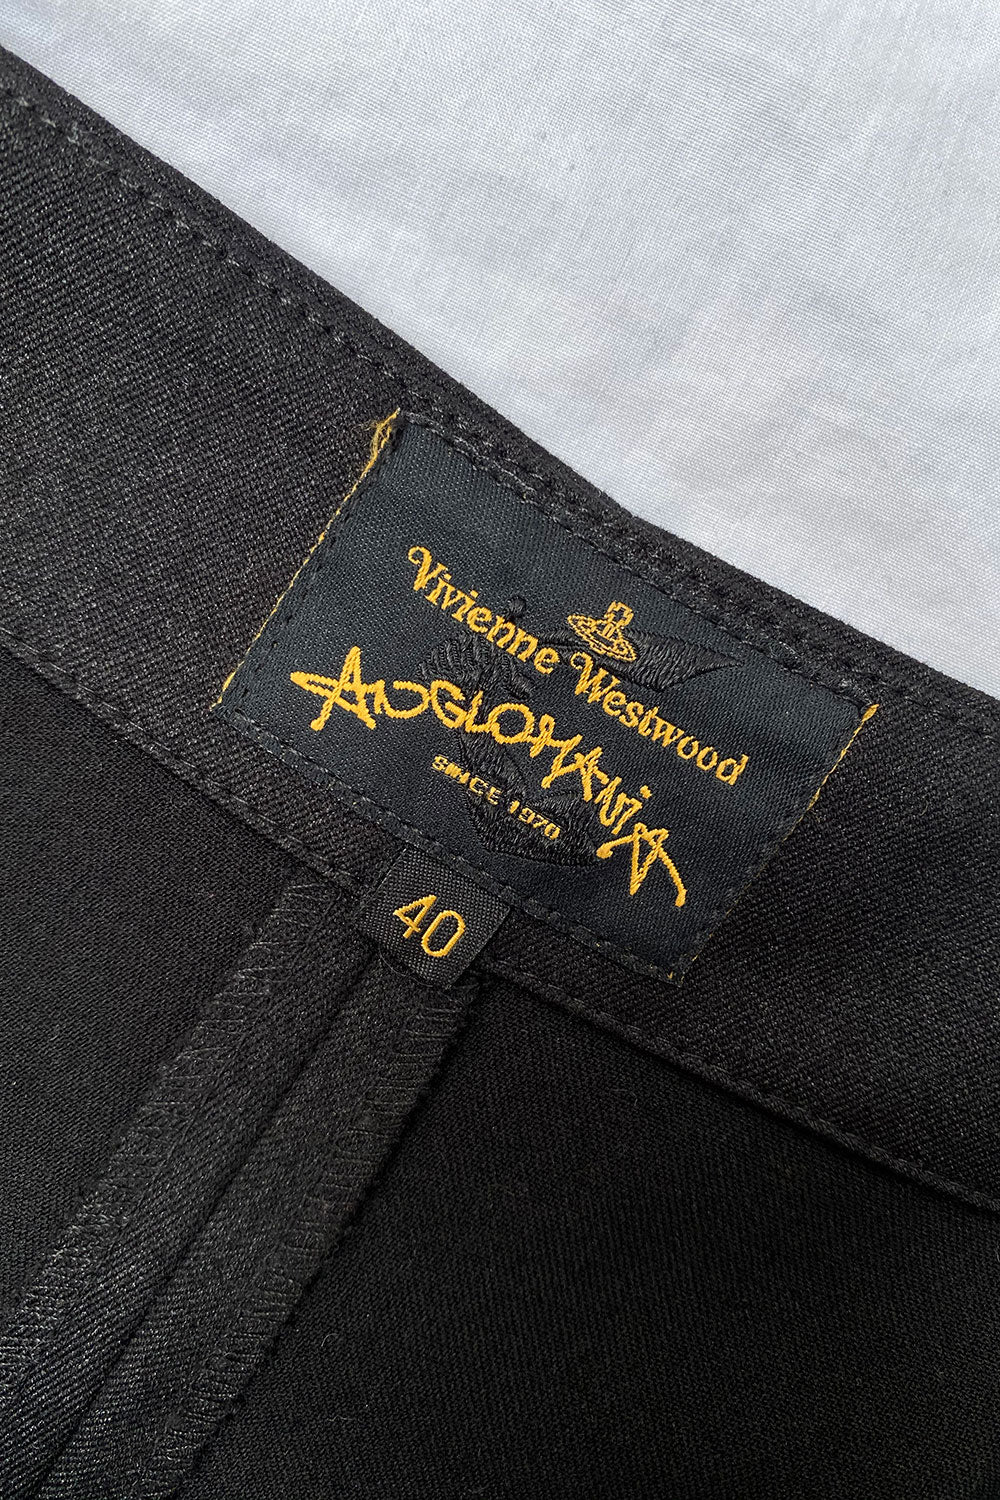 Vivienne Westwood Anglomania Draped Trousers Size 8